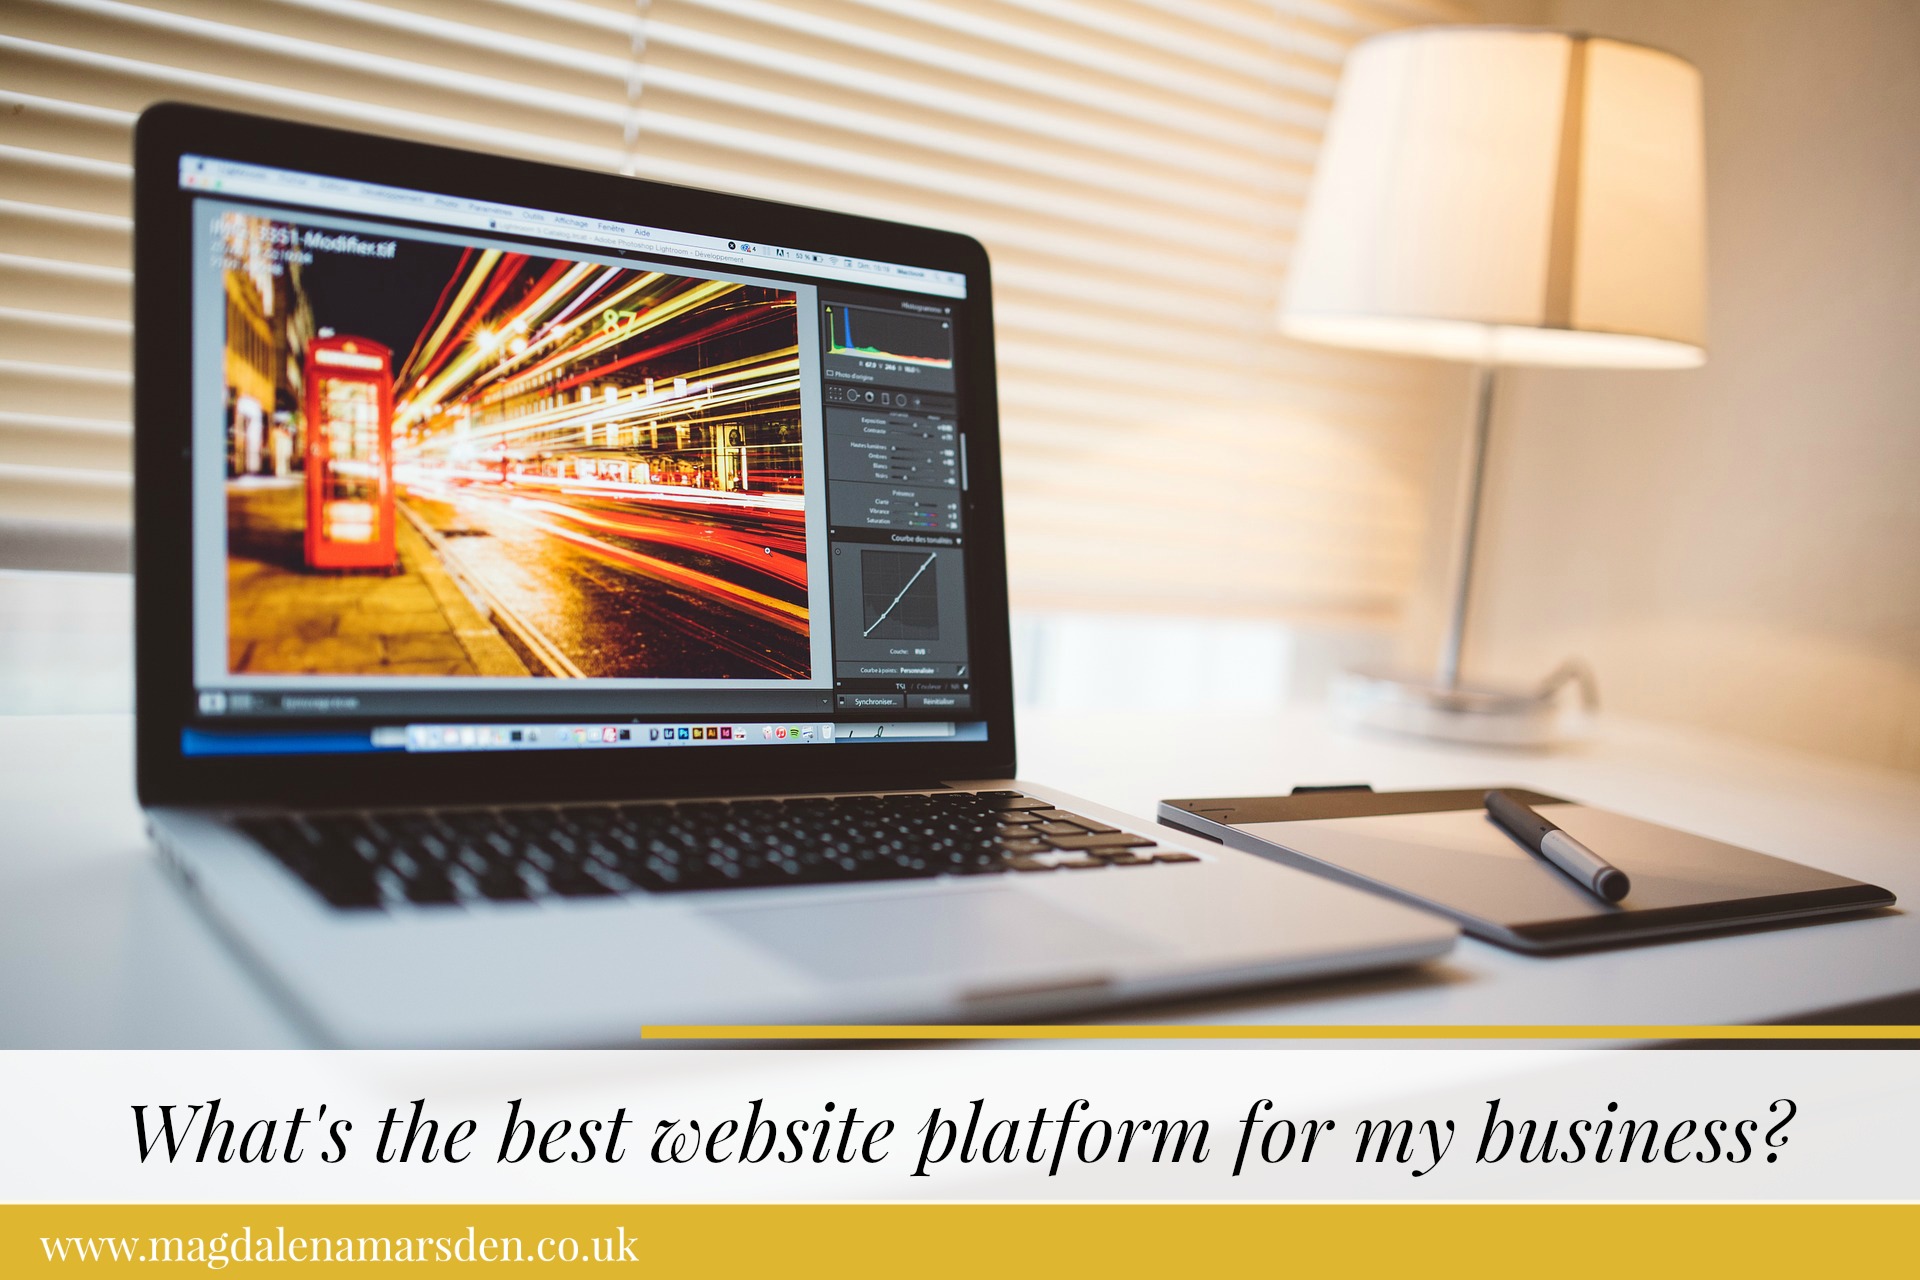 What's the best website platform for my business